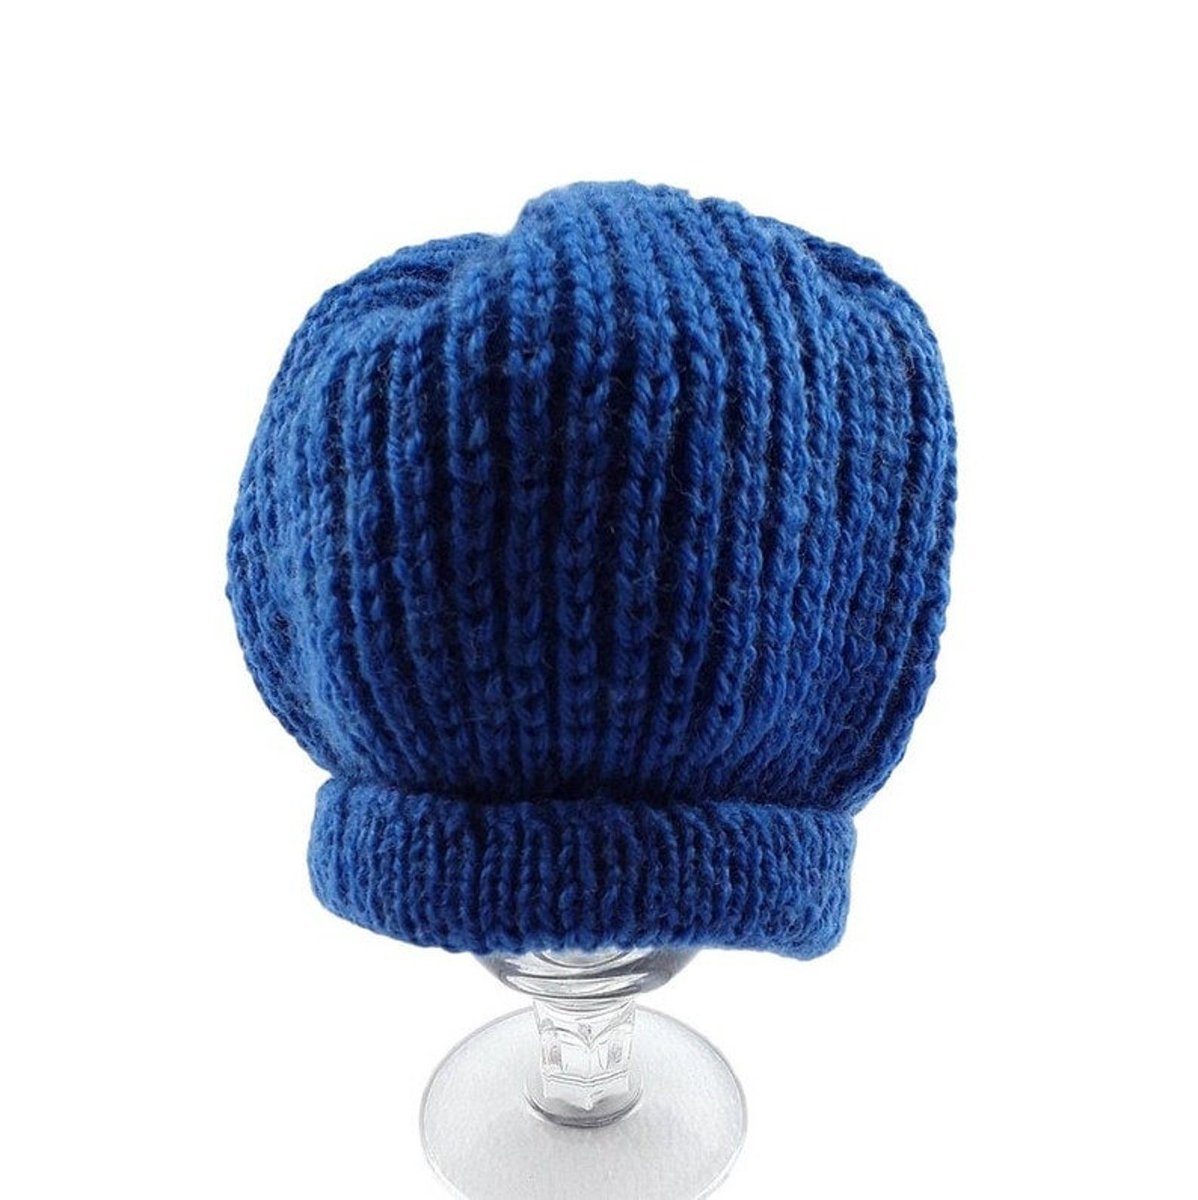 Keep your little ones cozy and stylish with this hand-knitted ribbed baby hat in blue. Ideal for 6-12 months old. Shop now on #Etsy from #Knittingtopia. #Supportsmallbusinesses and treasure unique finds. knittingtopia.etsy.com/listing/167945… #handmade #babyhat #craftbizparty #MHHSBD